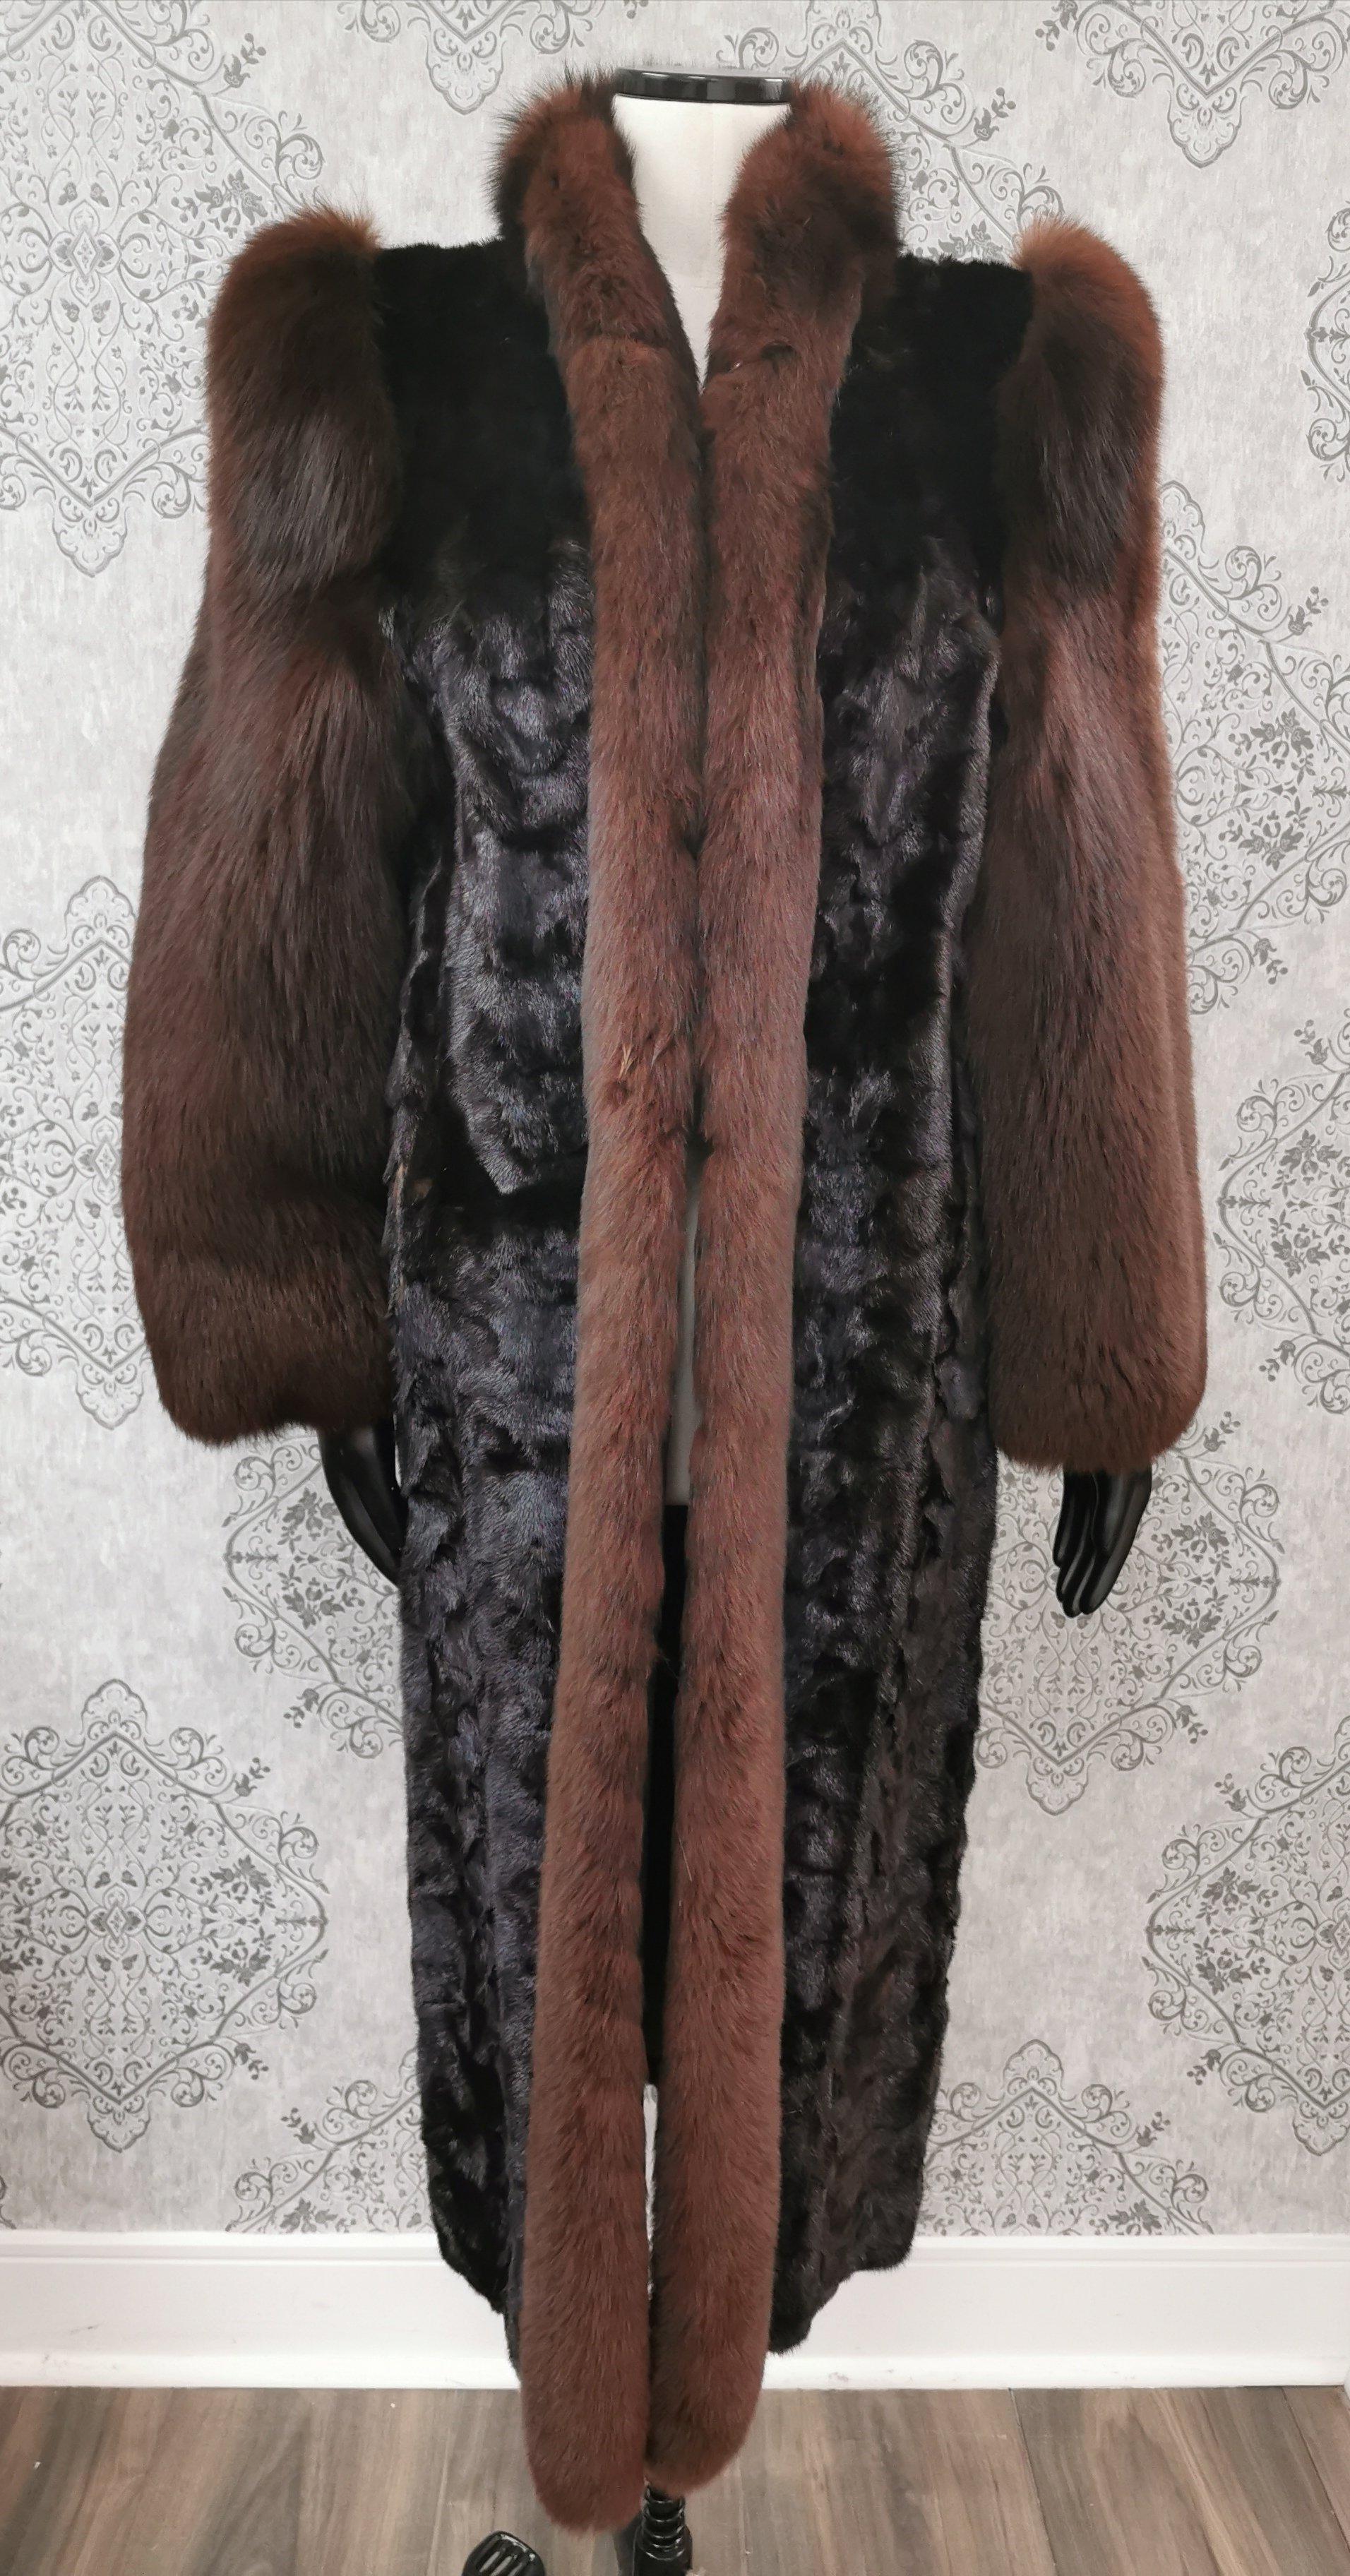 PRODUCT DESCRIPTION:

Pre-owned glamorous Mahogany mink fur coat with dyed shadow fox fur trims in collar and sleeves

Condition: Pristine

Closure: Hooks & Eyes

Color: Mahogany and 

Material: Demi Buff Mink

Garment type: Mid-Length